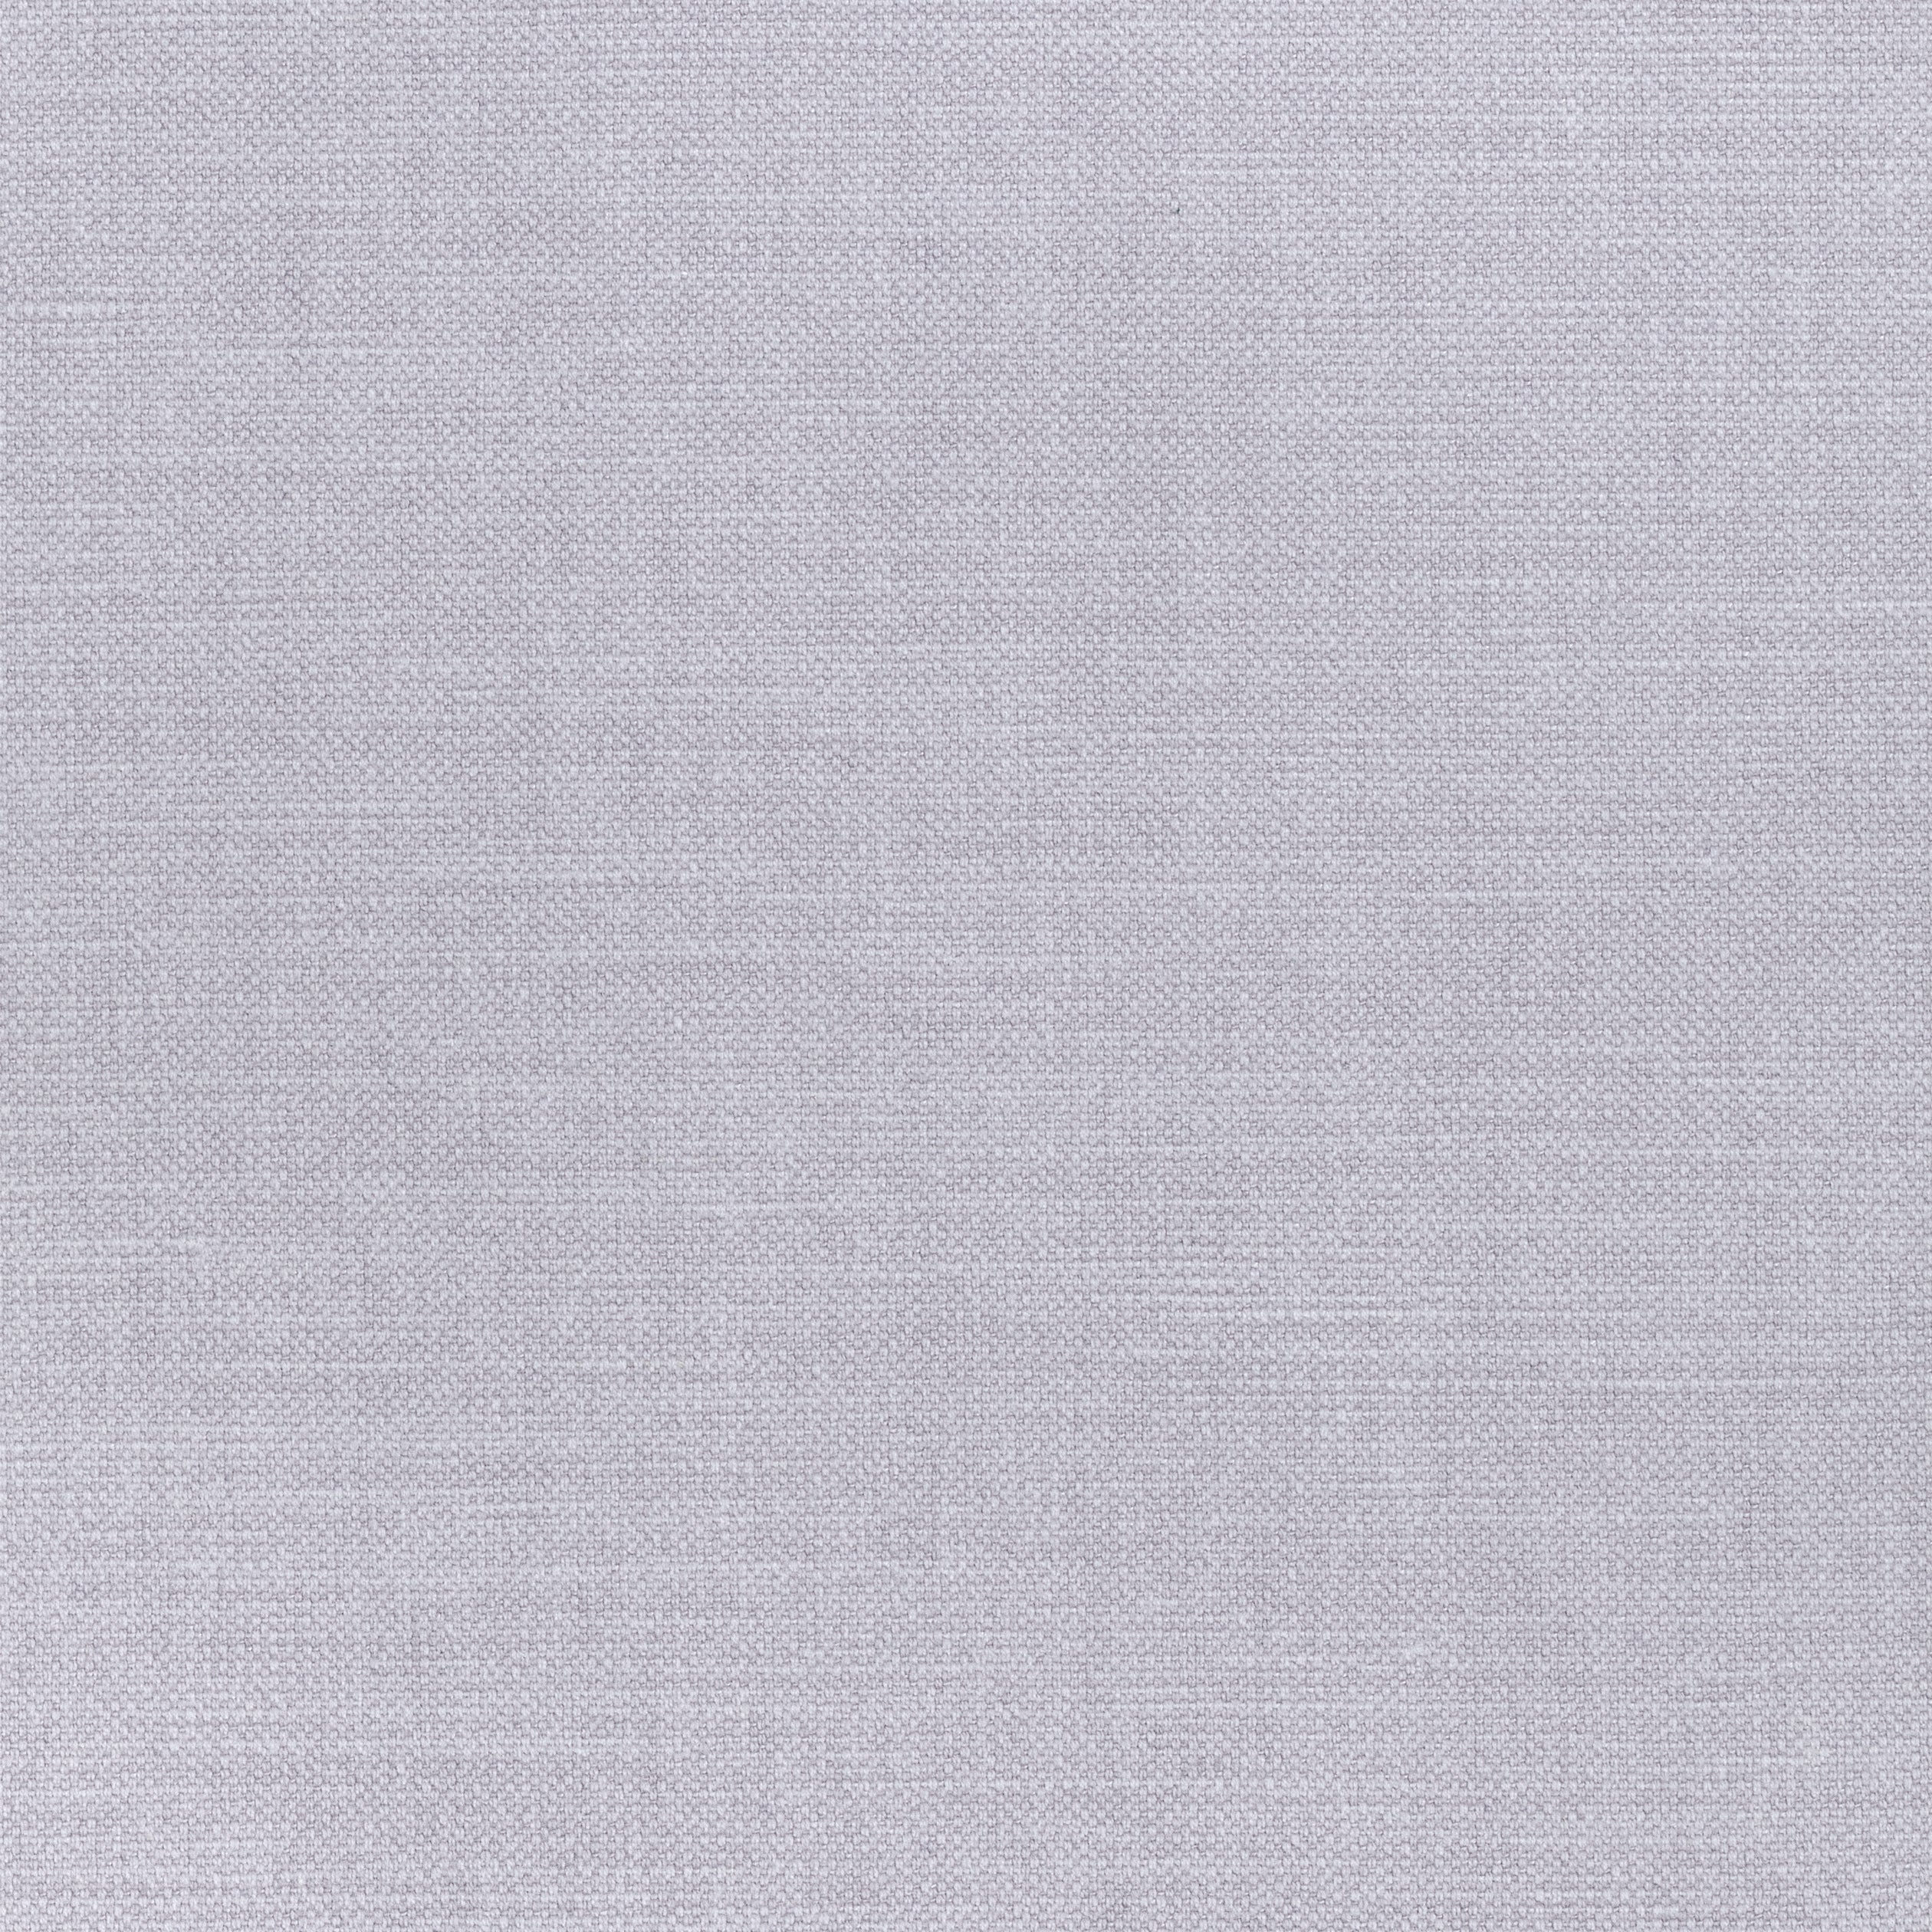 Prisma fabric in lilac color - pattern number W70135 - by Thibaut in the Woven Resource Vol 12 Prisma Fabrics collection